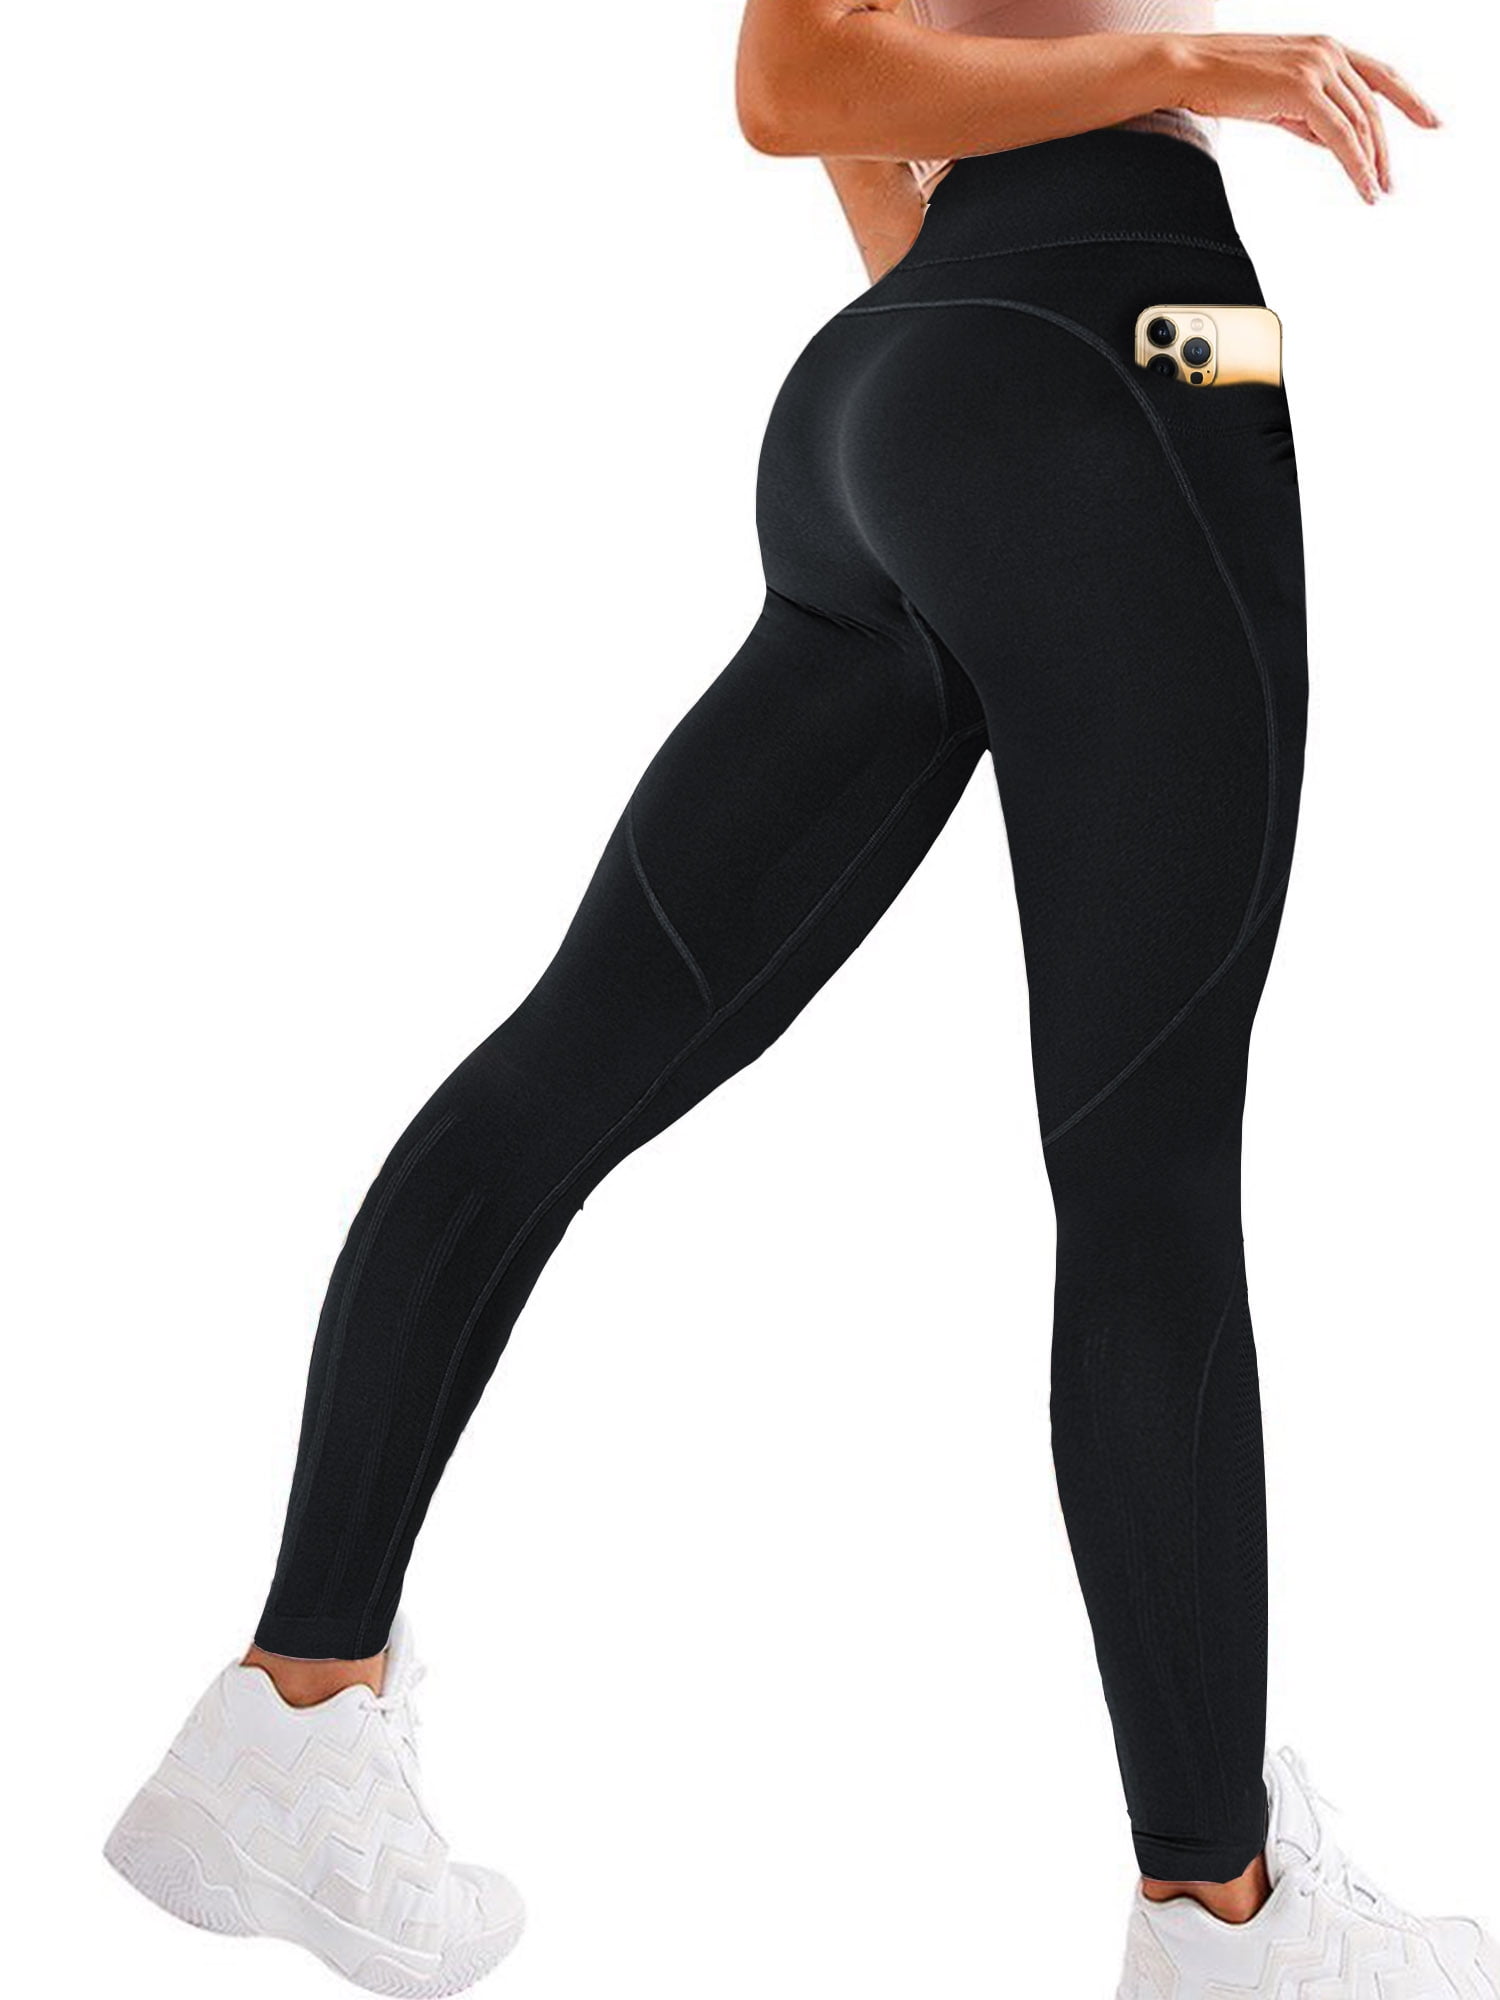 QRIC Womens Seamless Leggings With Pocket High Waisted Workout